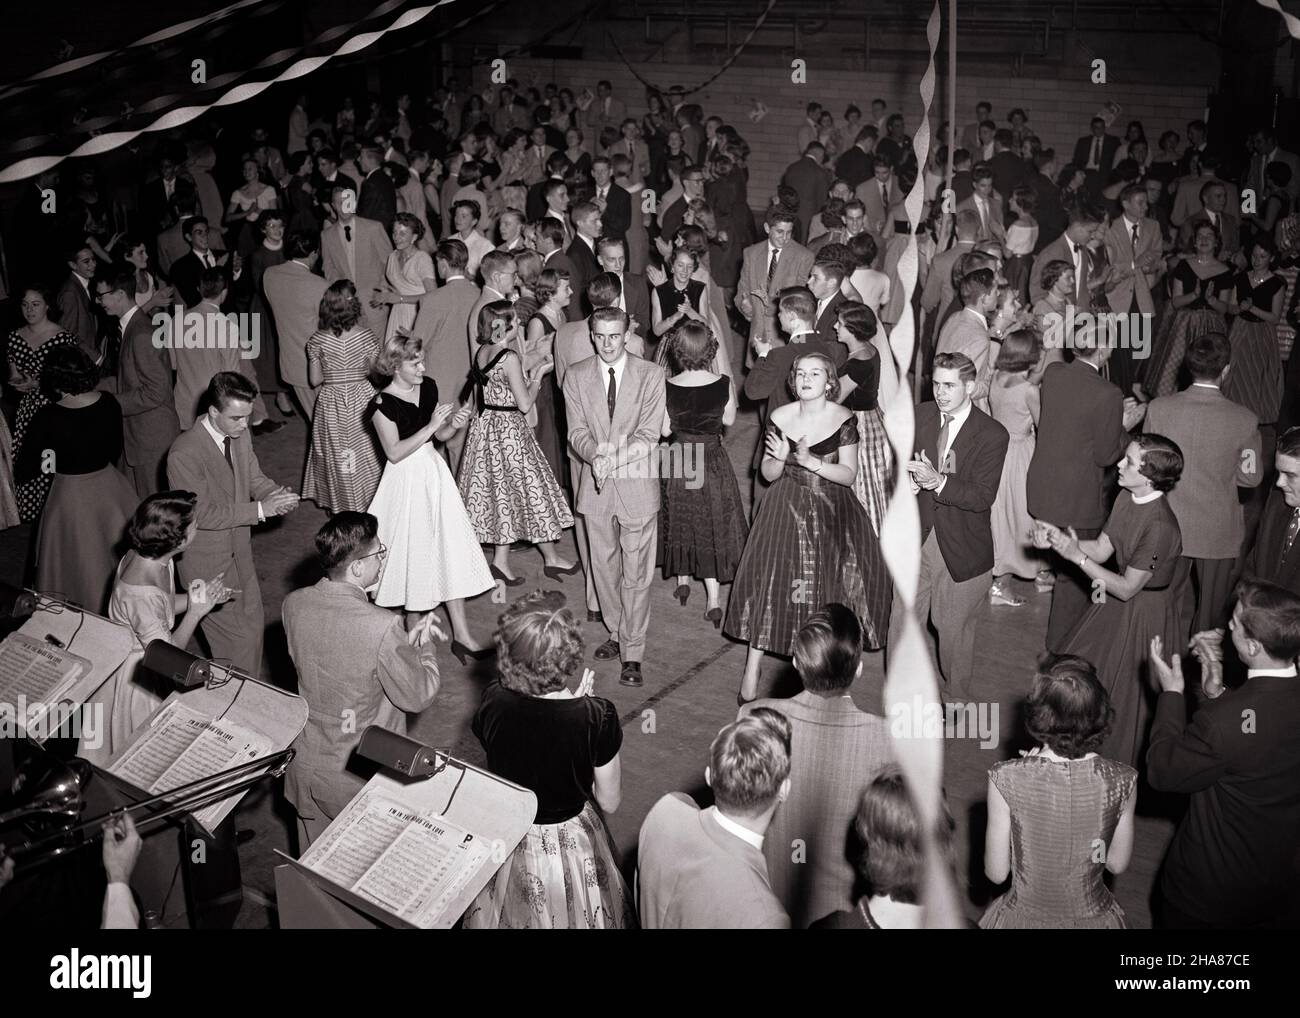 1950s TEENAGE BOYS IN SUITS AND GIRLS IN GOWNS DANCING CLAPPING HANDS IN FRONT OF BANDSTAND HIGH SCHOOL PROM DANCE PARTY - d1691 LAN001 HARS DANCERS SOCIAL OLD TIME NOSTALGIA OLD FASHION JUVENILE STYLE SUITS STRONG JOY LIFESTYLE CELEBRATION CROWDS FEMALES ASSEMBLY CLAPPING COPY SPACE FRIENDSHIP FULL-LENGTH HALF-LENGTH PERSONS CARING MALES TEENAGE GIRL TEENAGE BOY B&W GATHERING DATING SCHOOLS SUIT AND TIE HAPPINESS HIGH ANGLE AND EXCITEMENT GOWNS IN OF ATTRACTION GYMNASIUM HIGH SCHOOL BANDSTAND HIGH SCHOOLS COURTSHIP STYLISH TEENAGED IN FRONT OF PERSONAL ATTACHMENT POSSIBILITY AFFECTION EMOTION Stock Photo